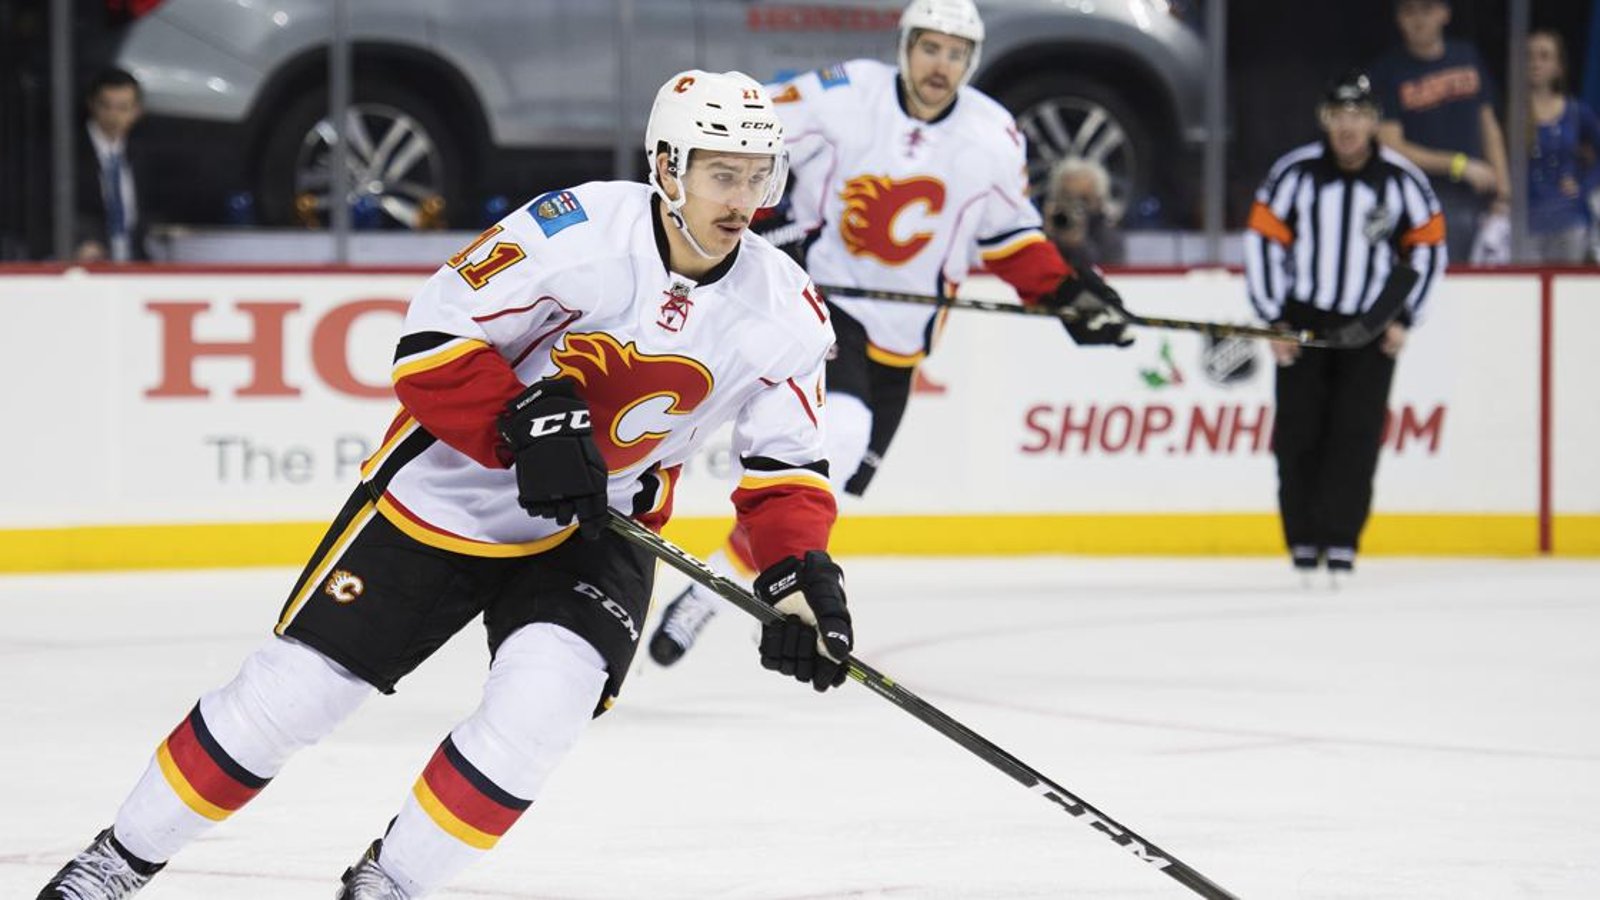 Mikael Backlund in the race for coveted award! 